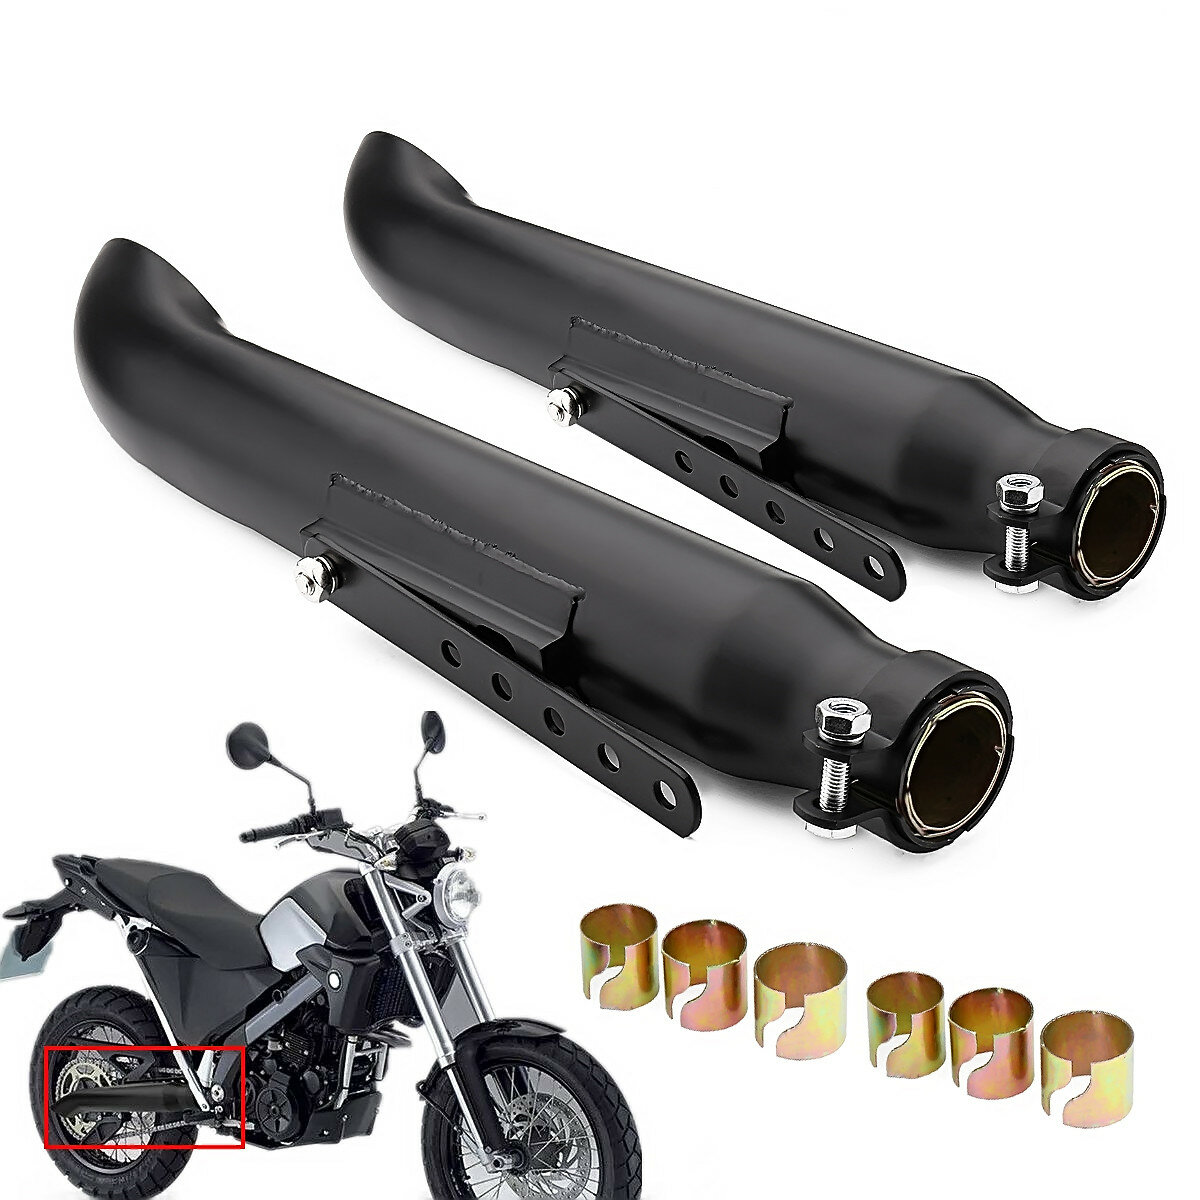 2X Motorcycle Exhaust Muffler Pipe Tip Retro Vintage Rear Pipe Tube Black For Bobbers